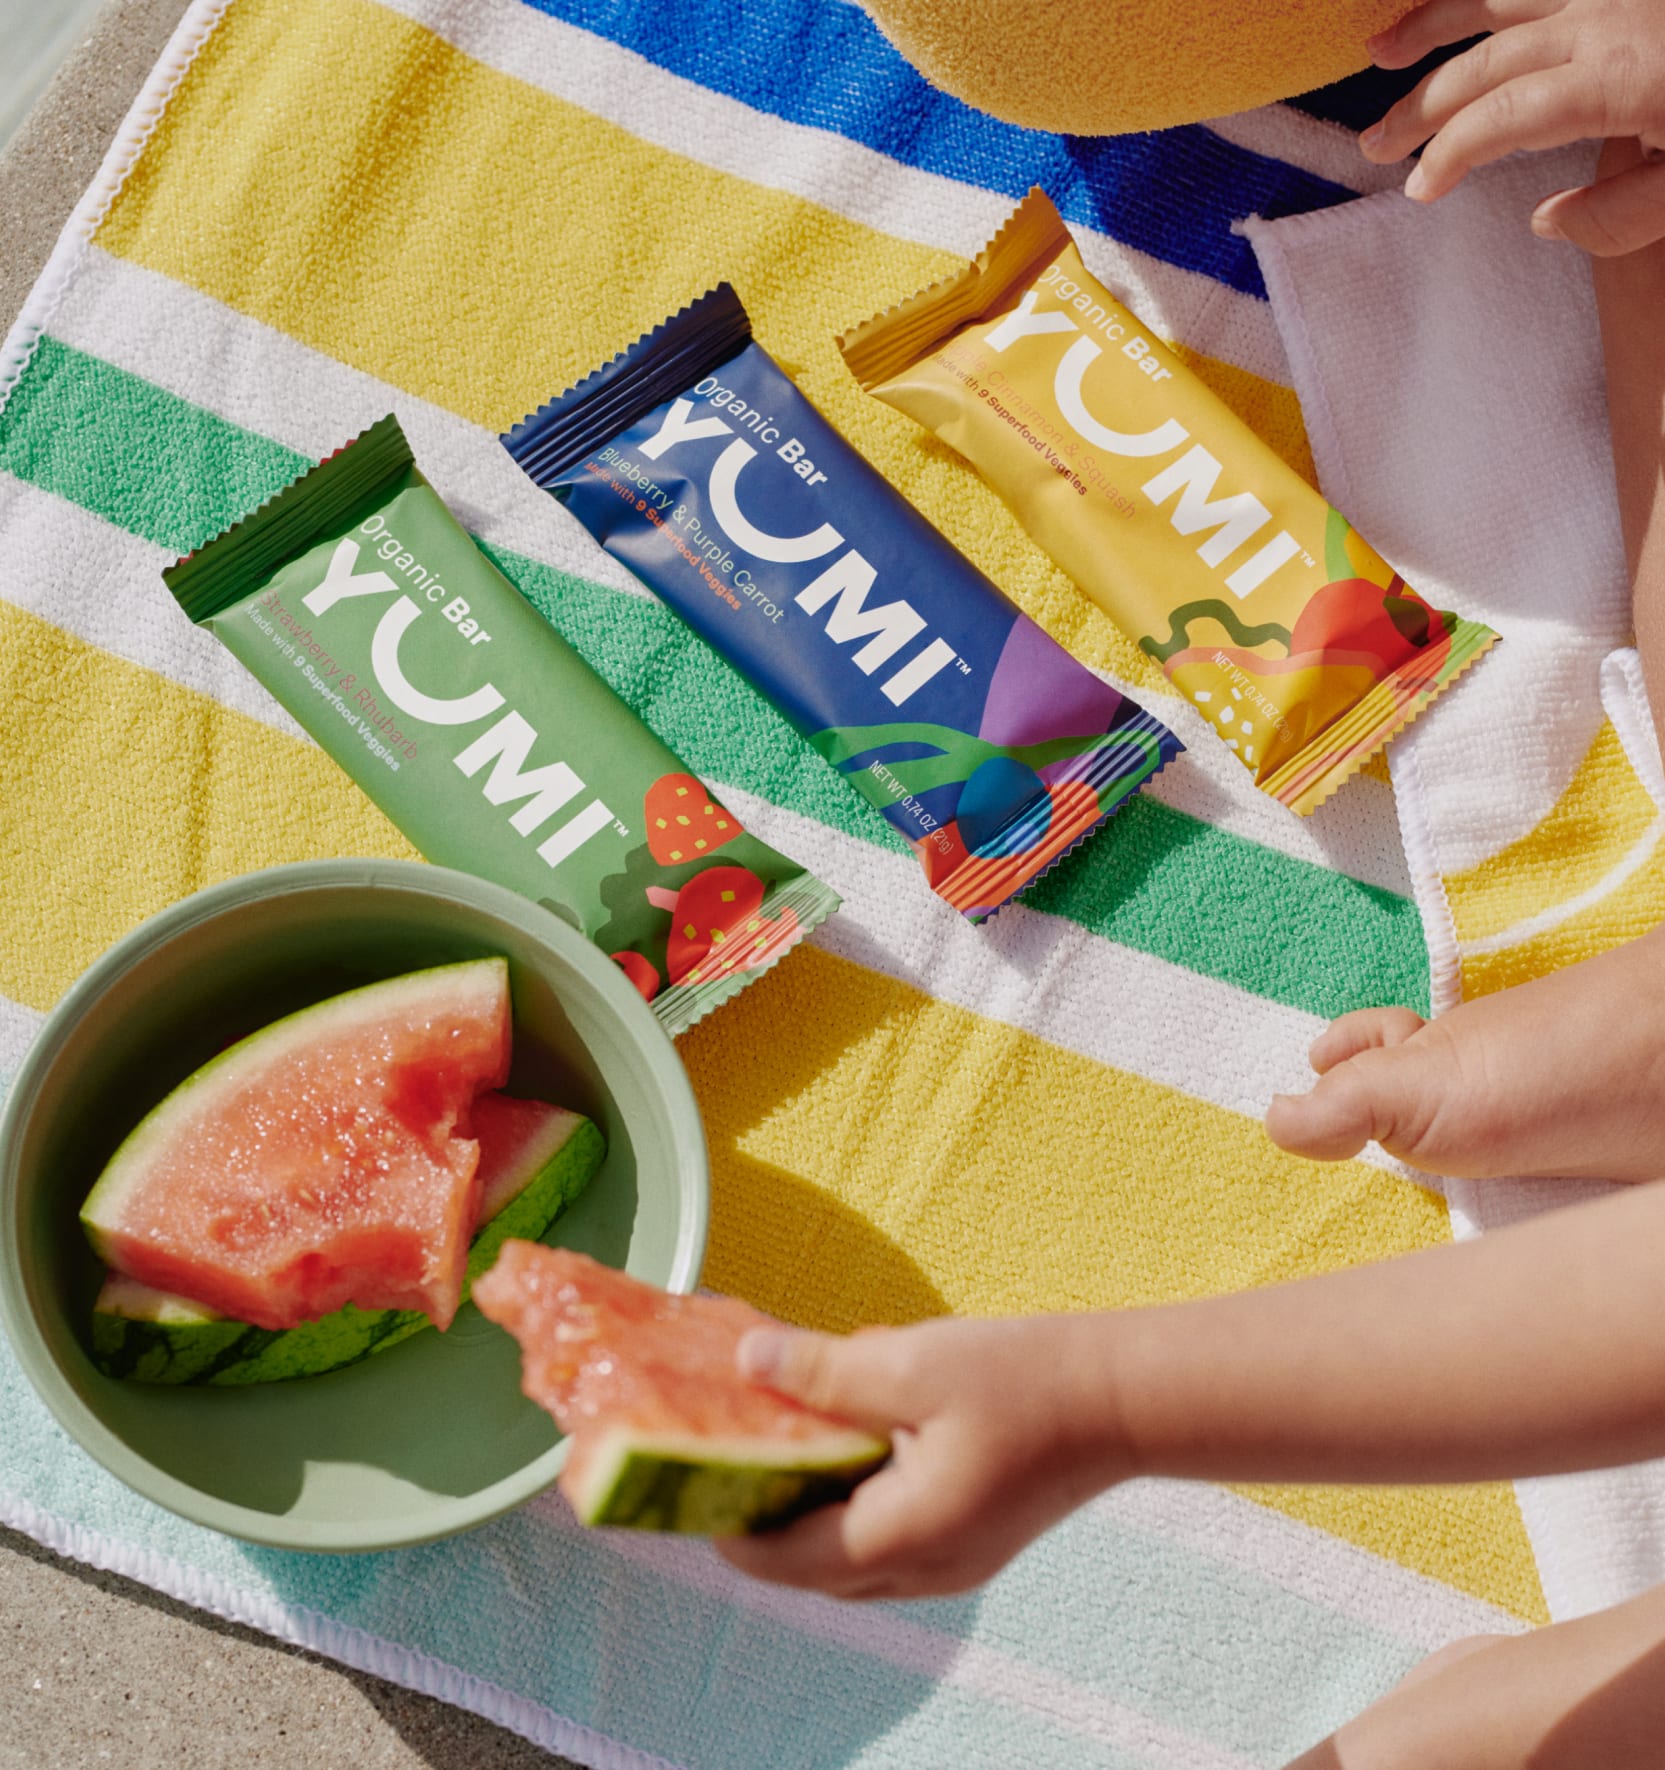 Three Yumi snack bars lie on a beach towel next to a bowl of watermelon slices.